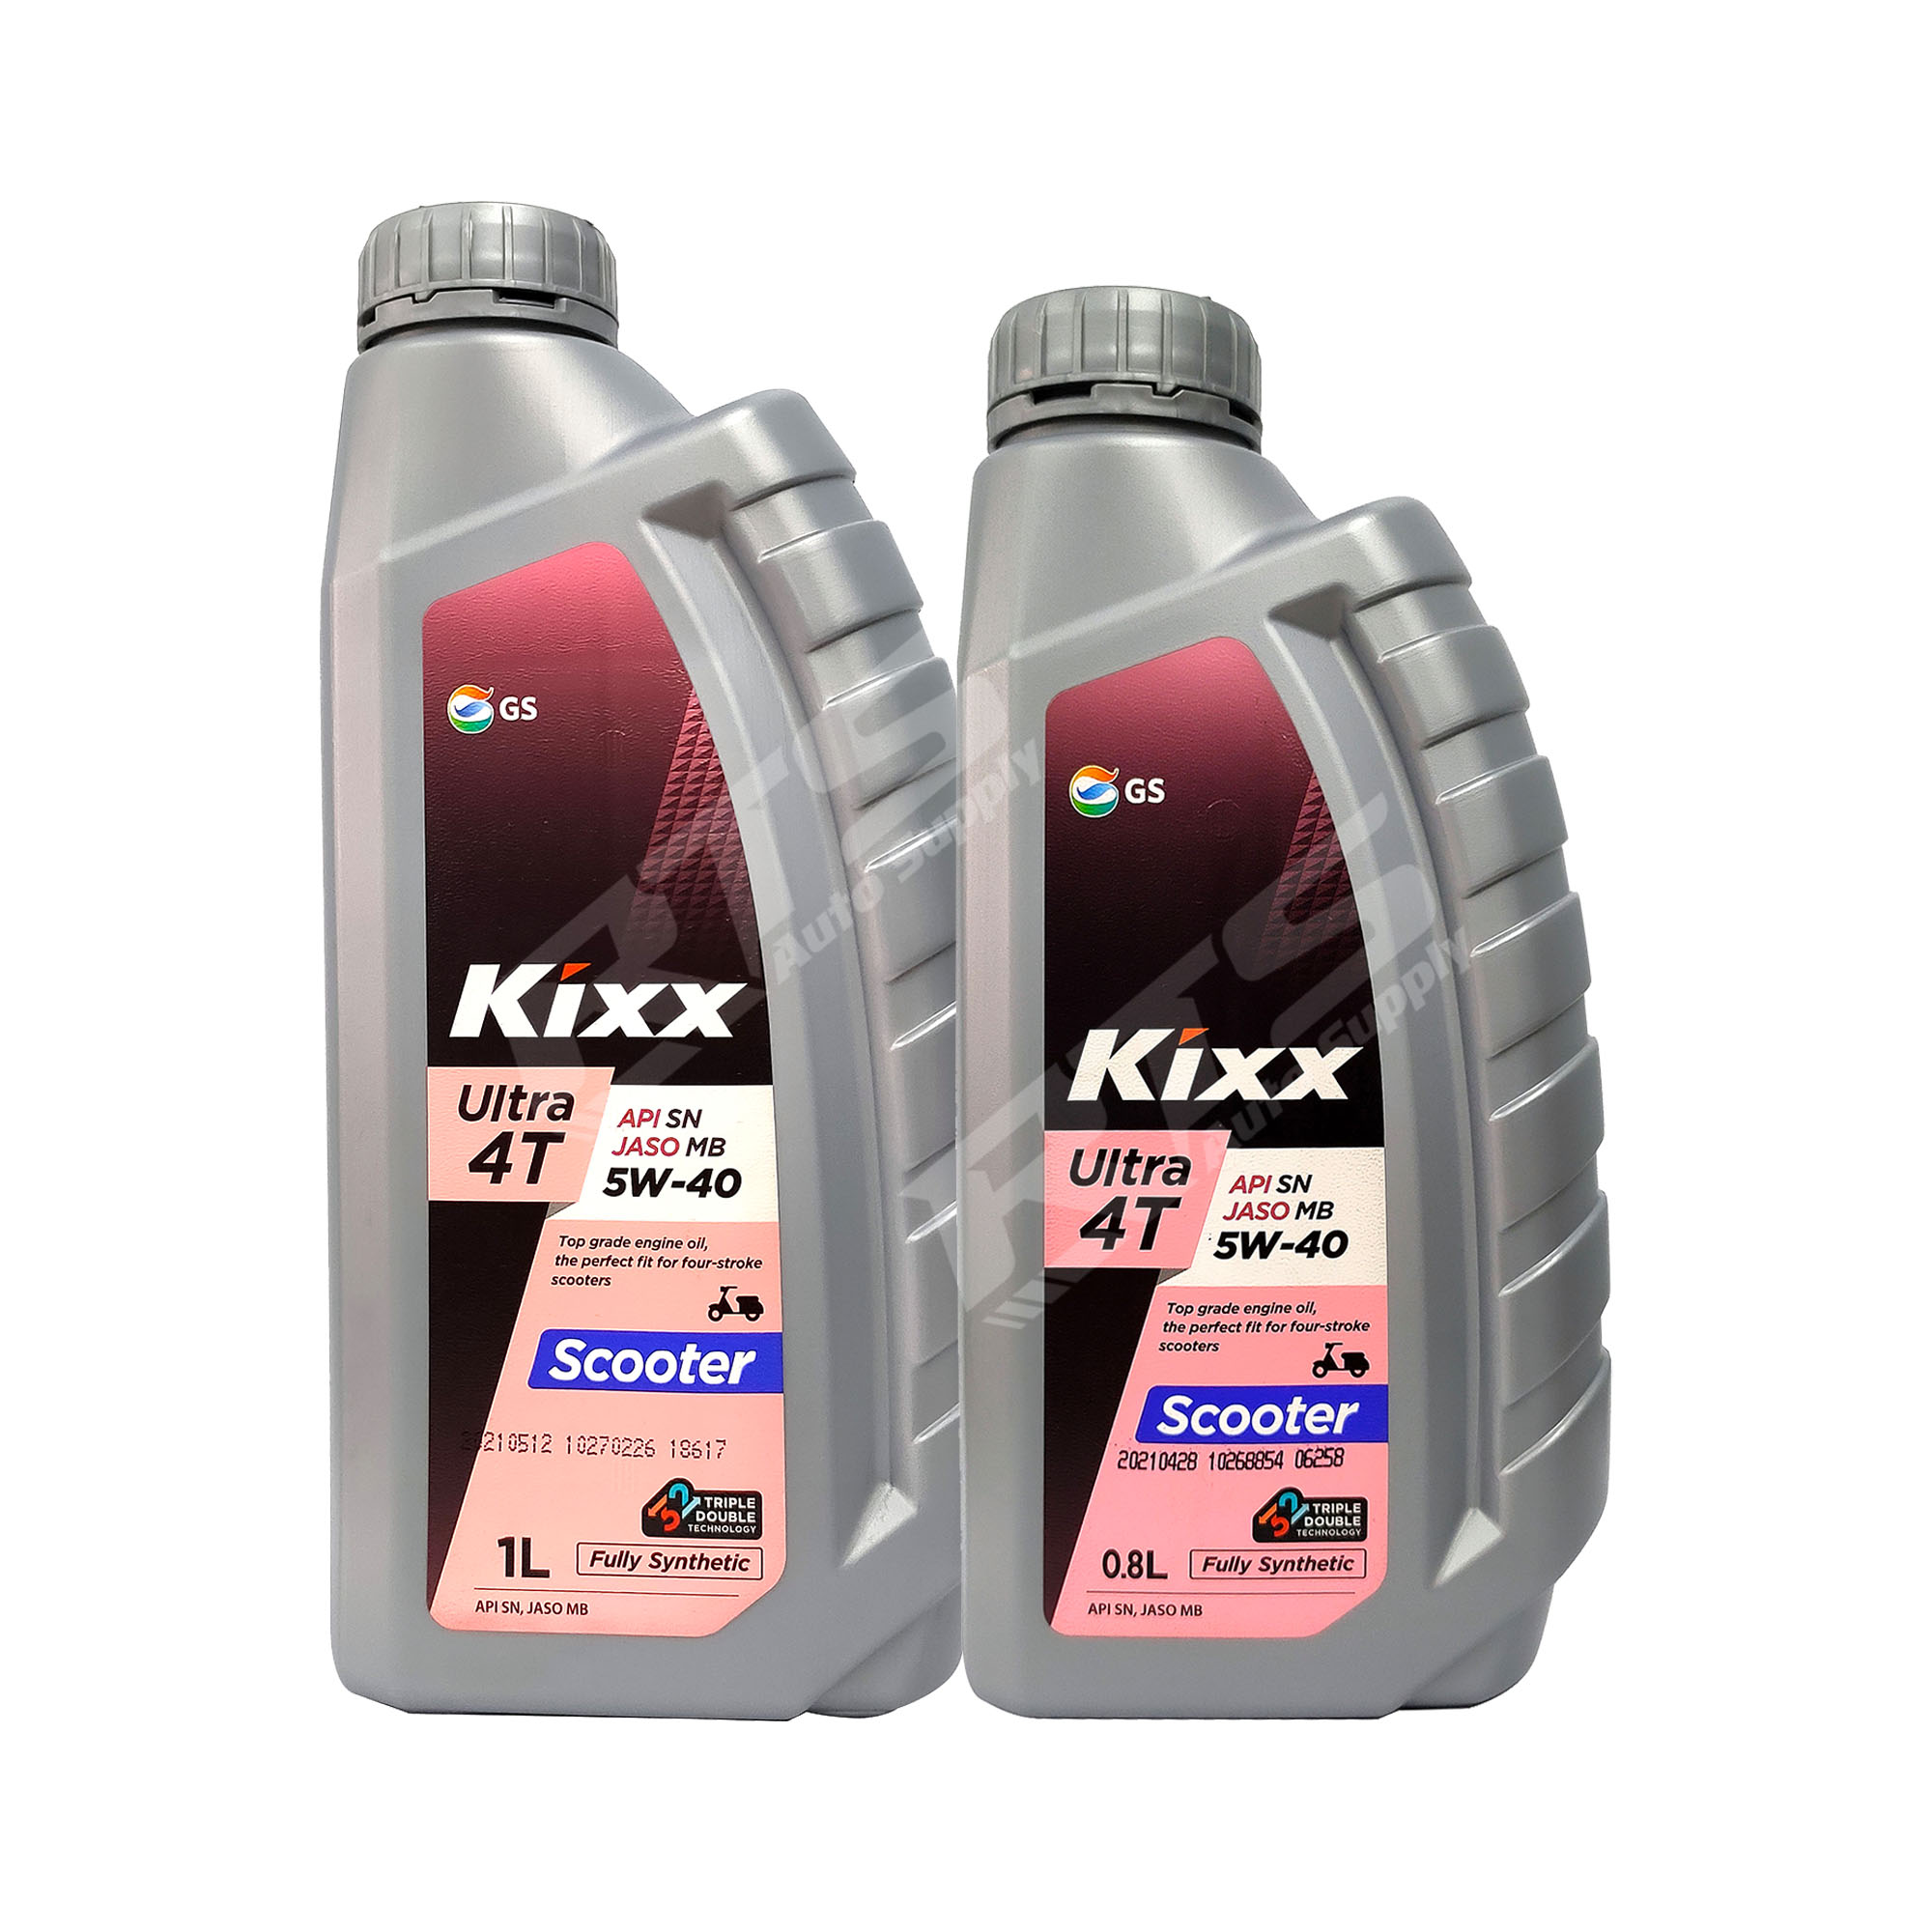 KIXX Ultra 4T Scooter 5w40 JASO MB Fully Synthetic Scooter engine oil .